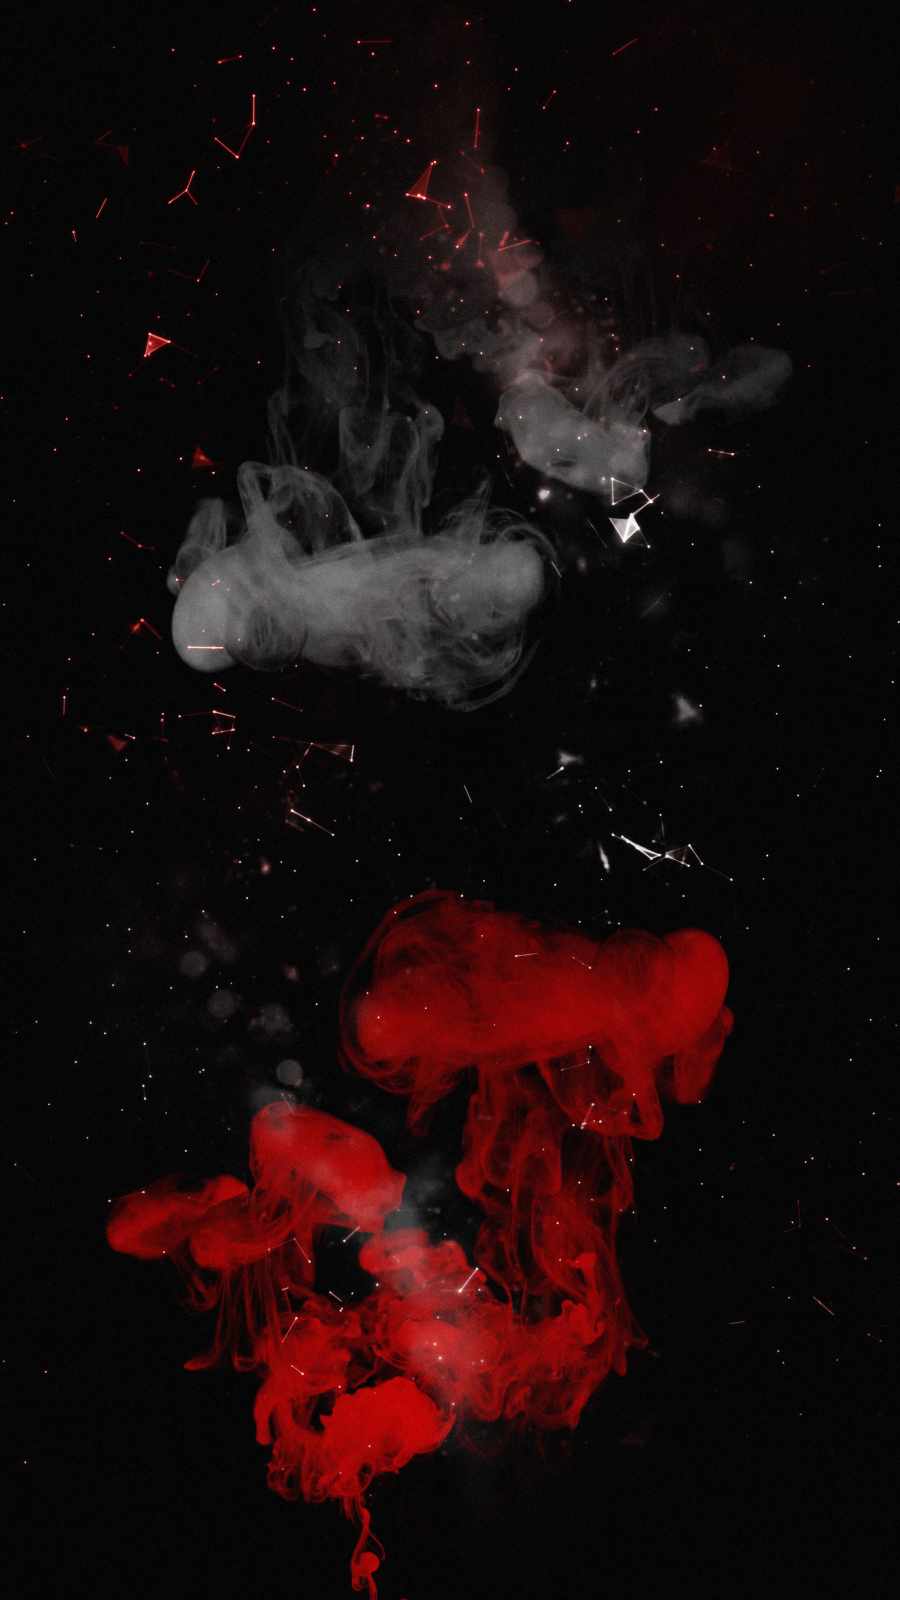 Smoke Clouds IPhone Wallpaper - IPhone Wallpapers : iPhone Wallpapers